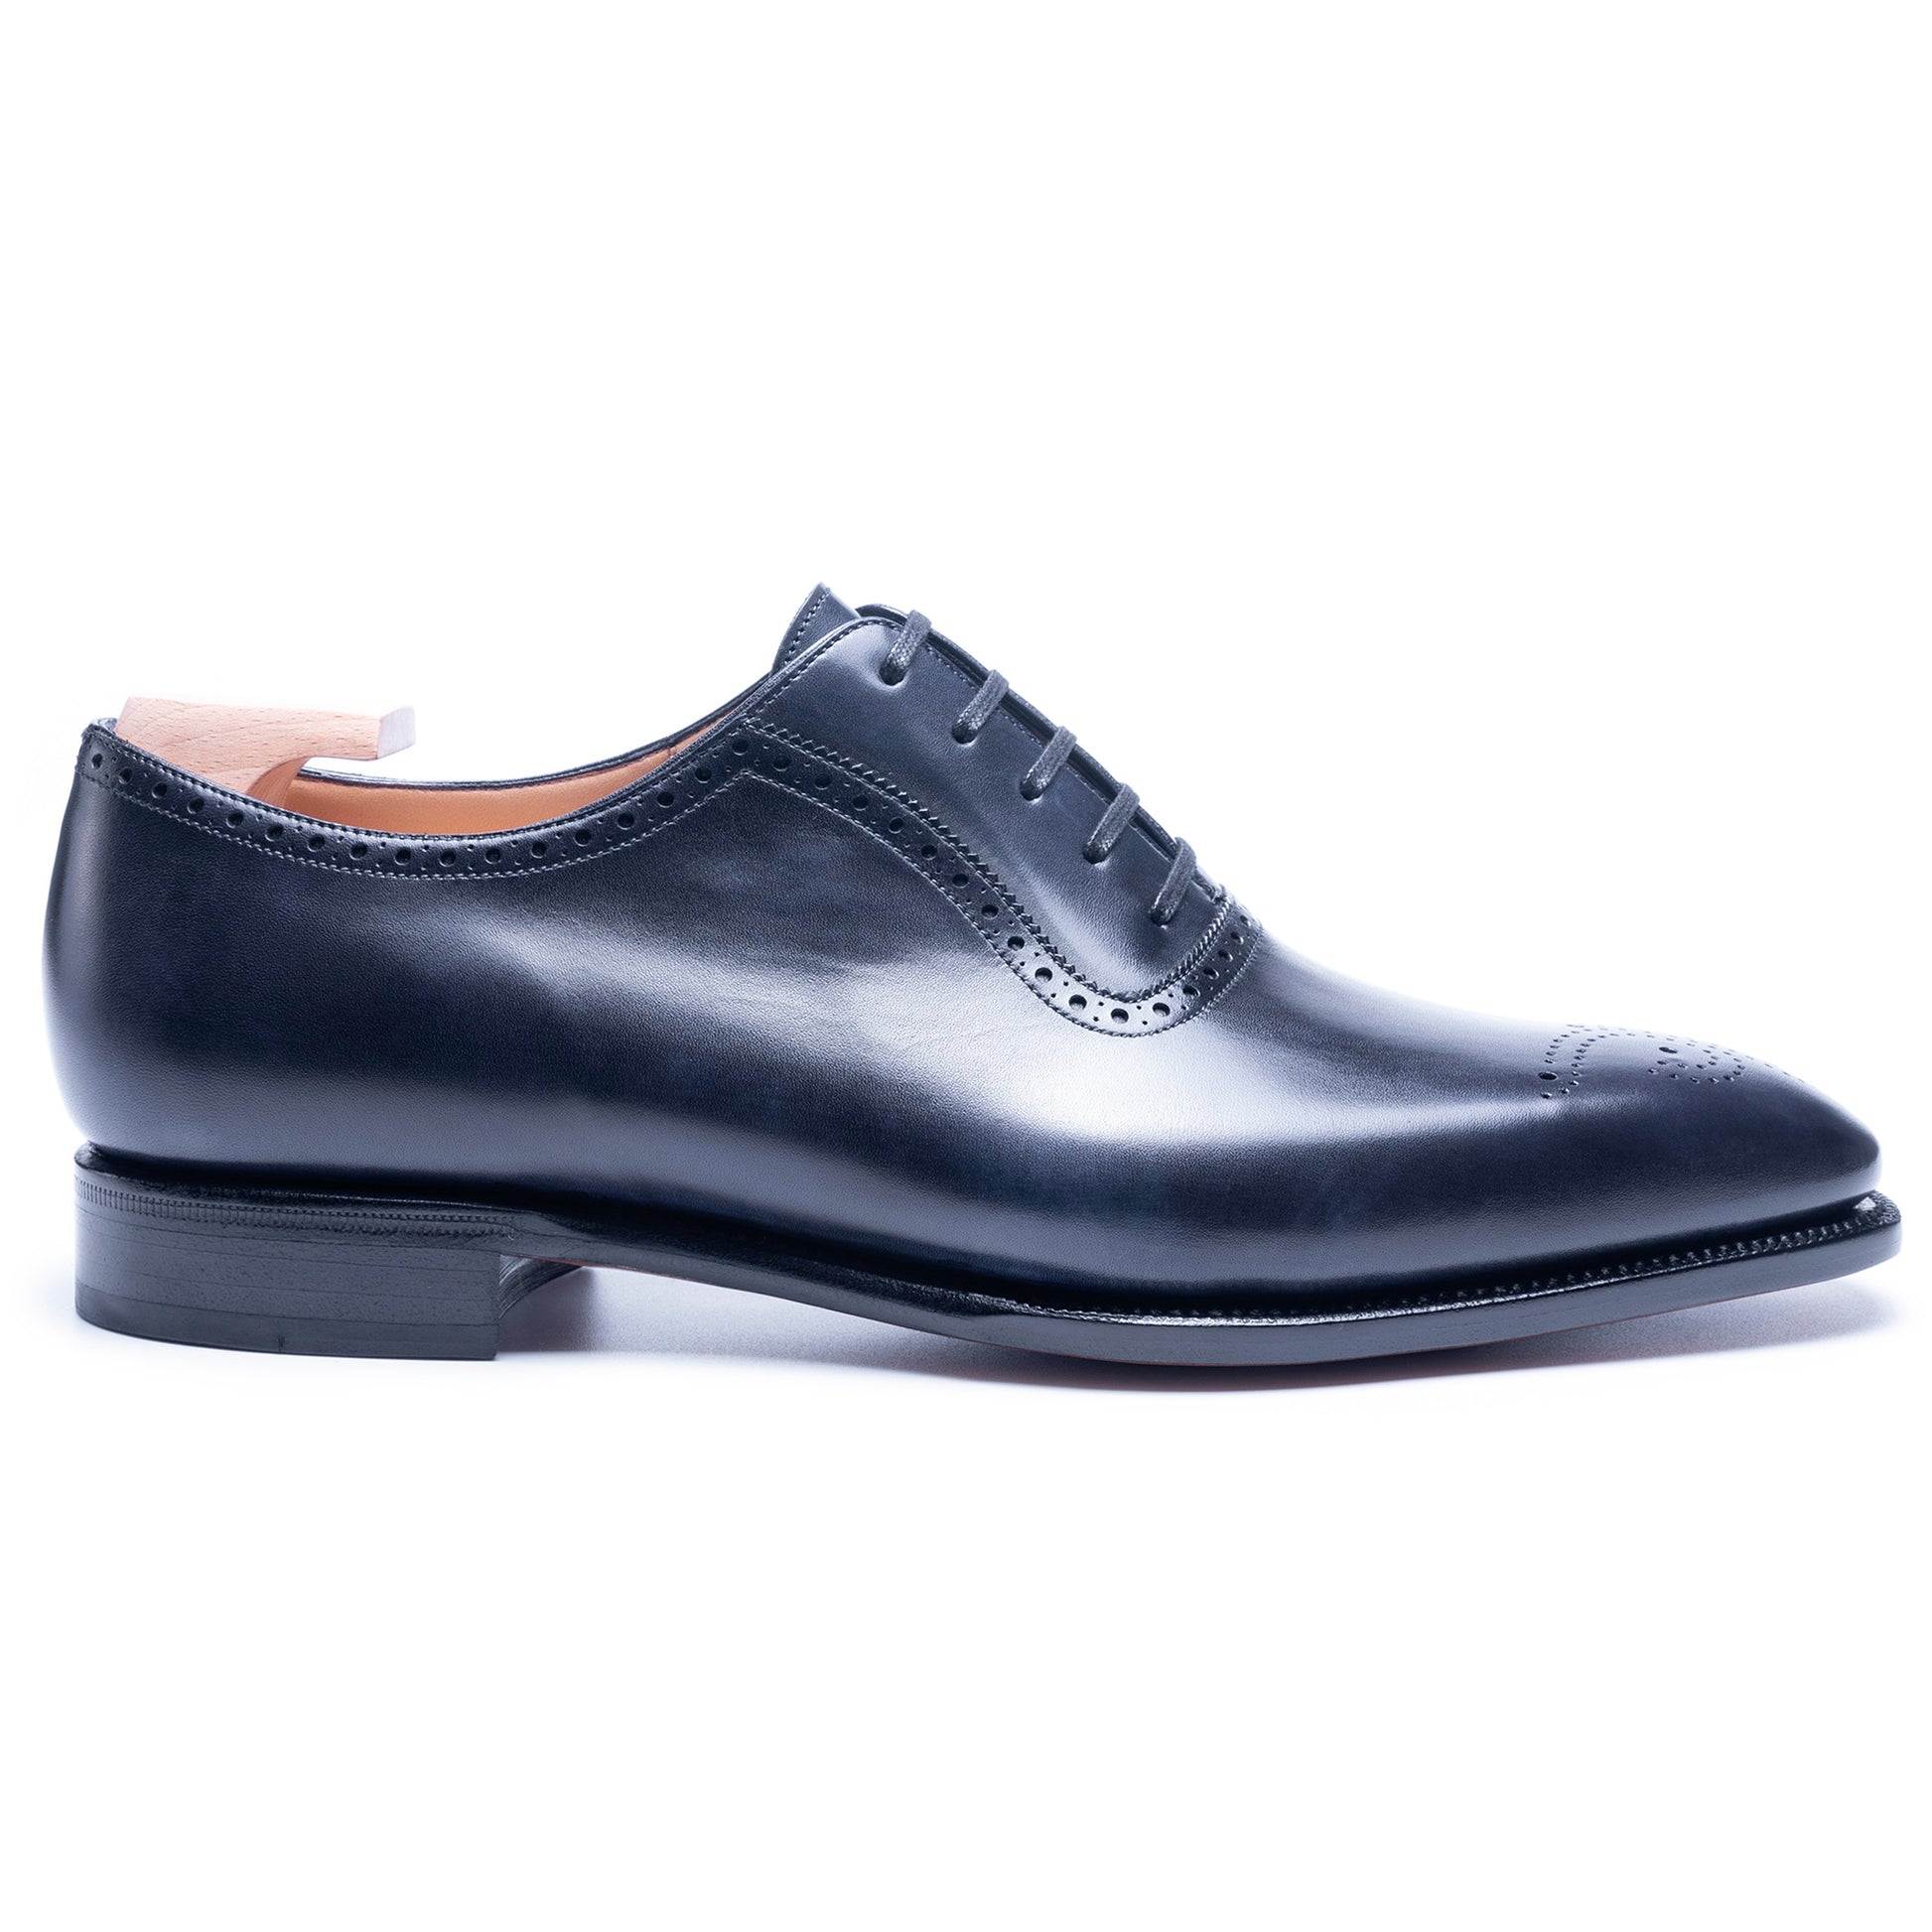 TLB Mallorca leather shoes 237 / PICASSO / VEGANO NAVY